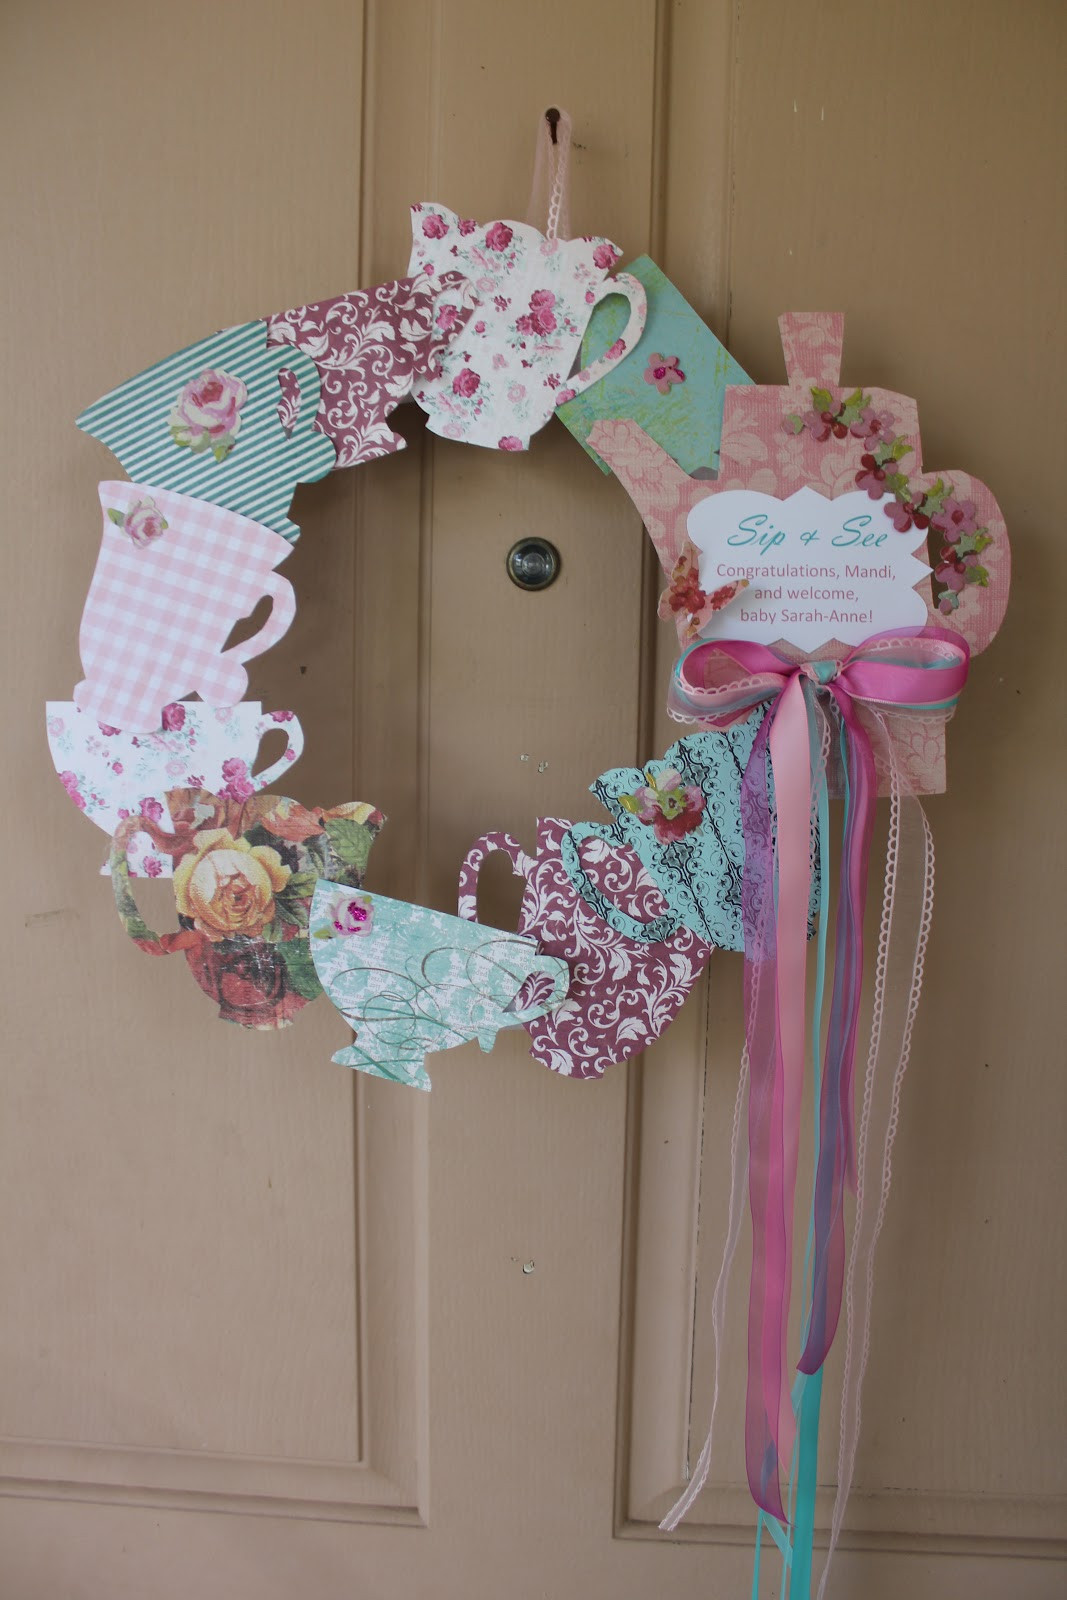 Tea Party Craft Ideas
 Precise is Nice Sip and See Baby Shower tea party style